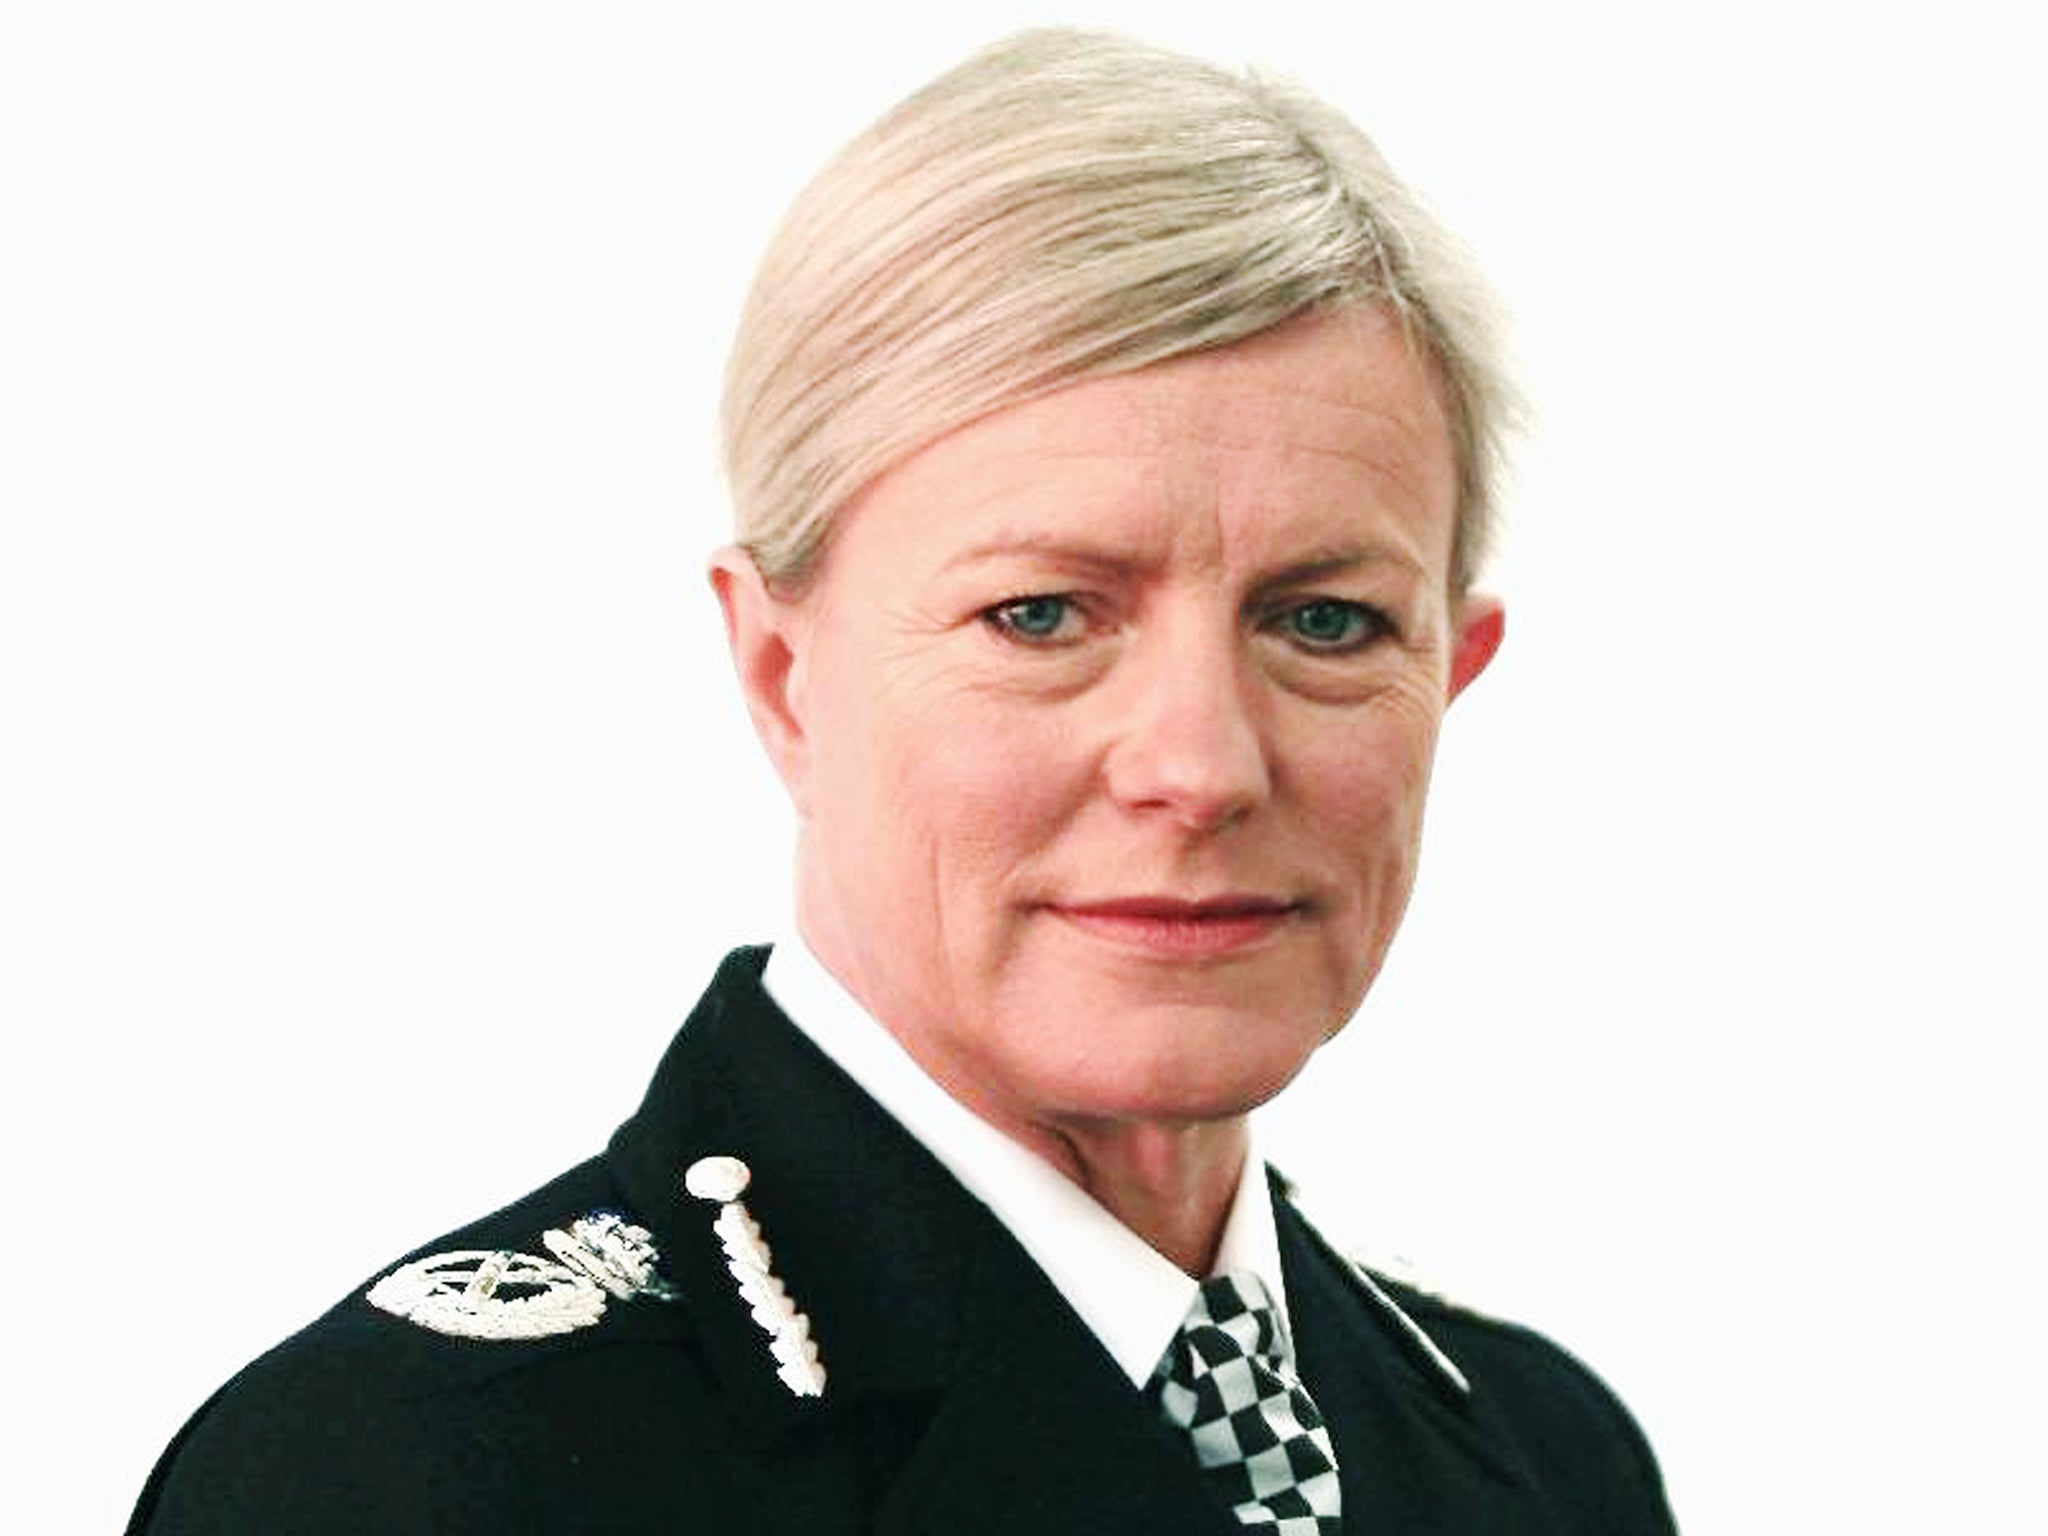 NPCC’s chair Sara Thornton says findings ‘reinforce the importance and urgency of addressing a number of familiar issues’